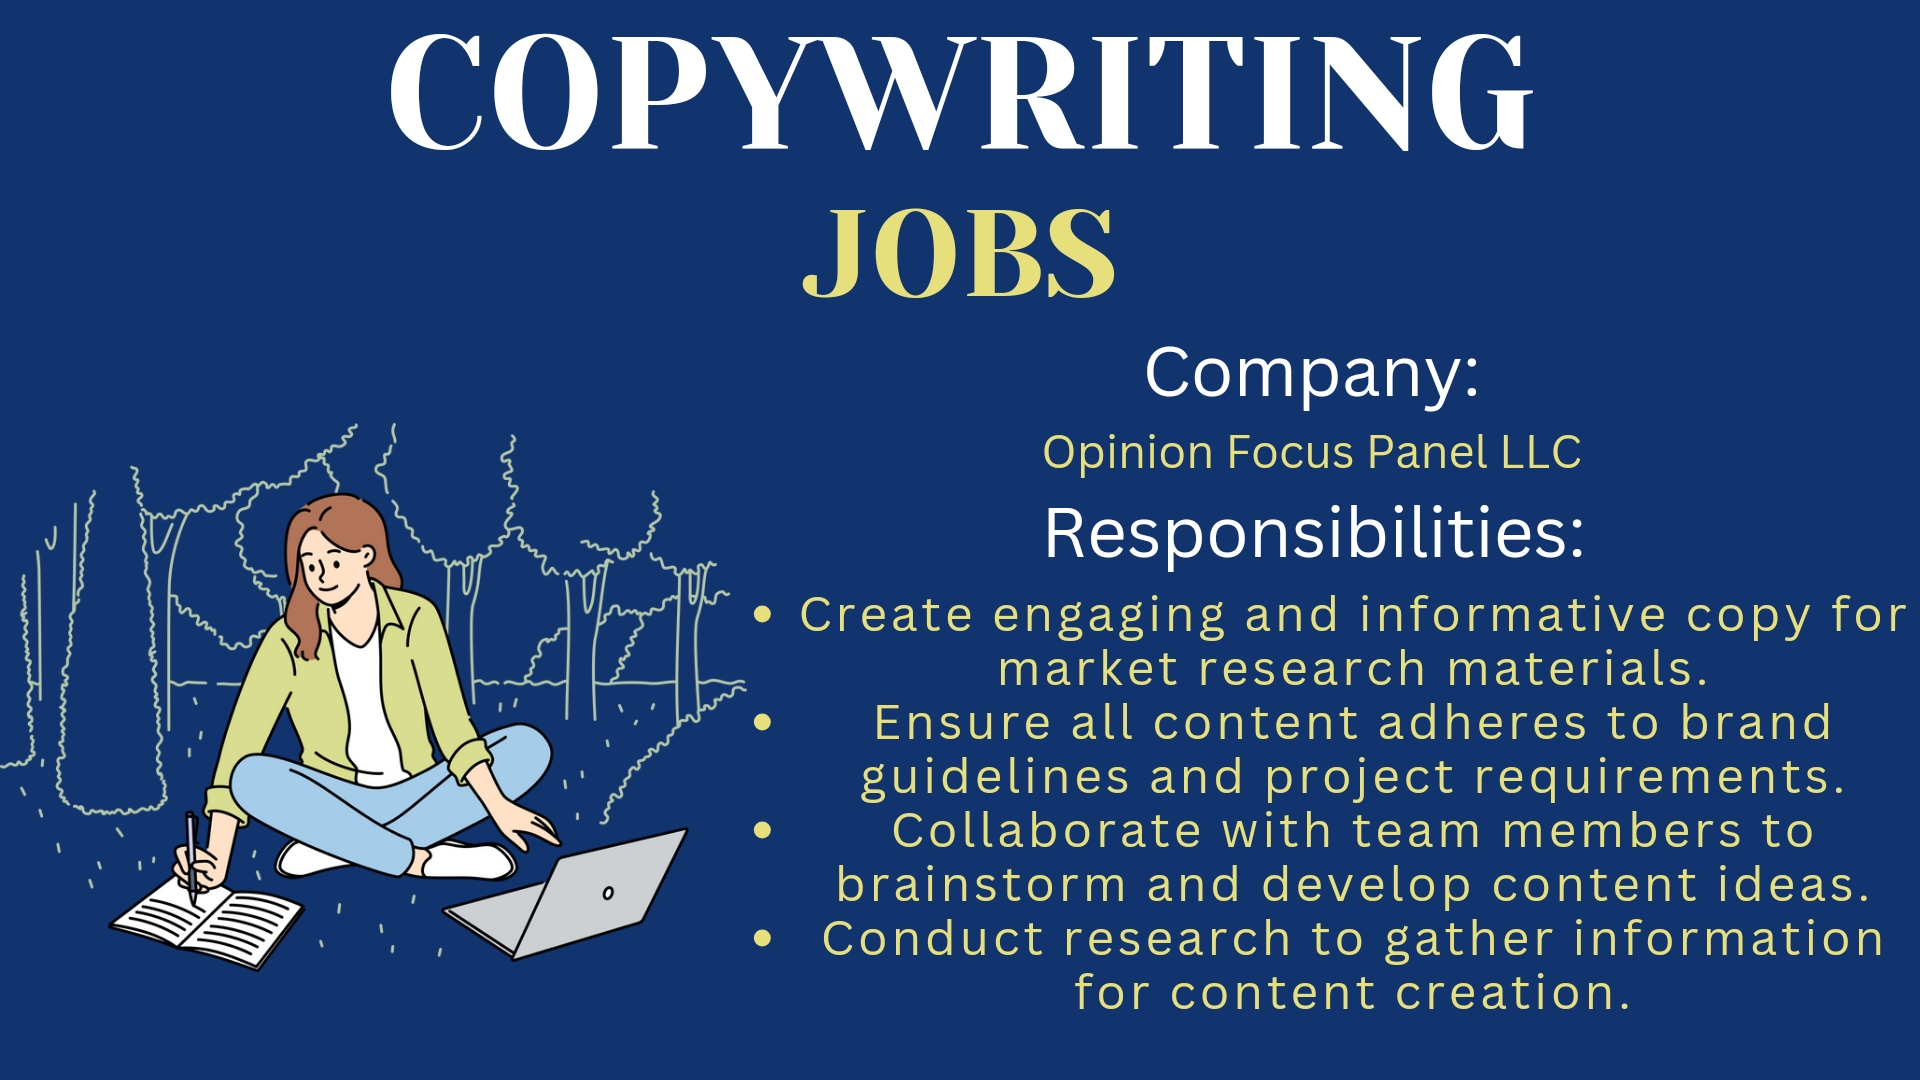 Copywriting – Remote Work From Home Job